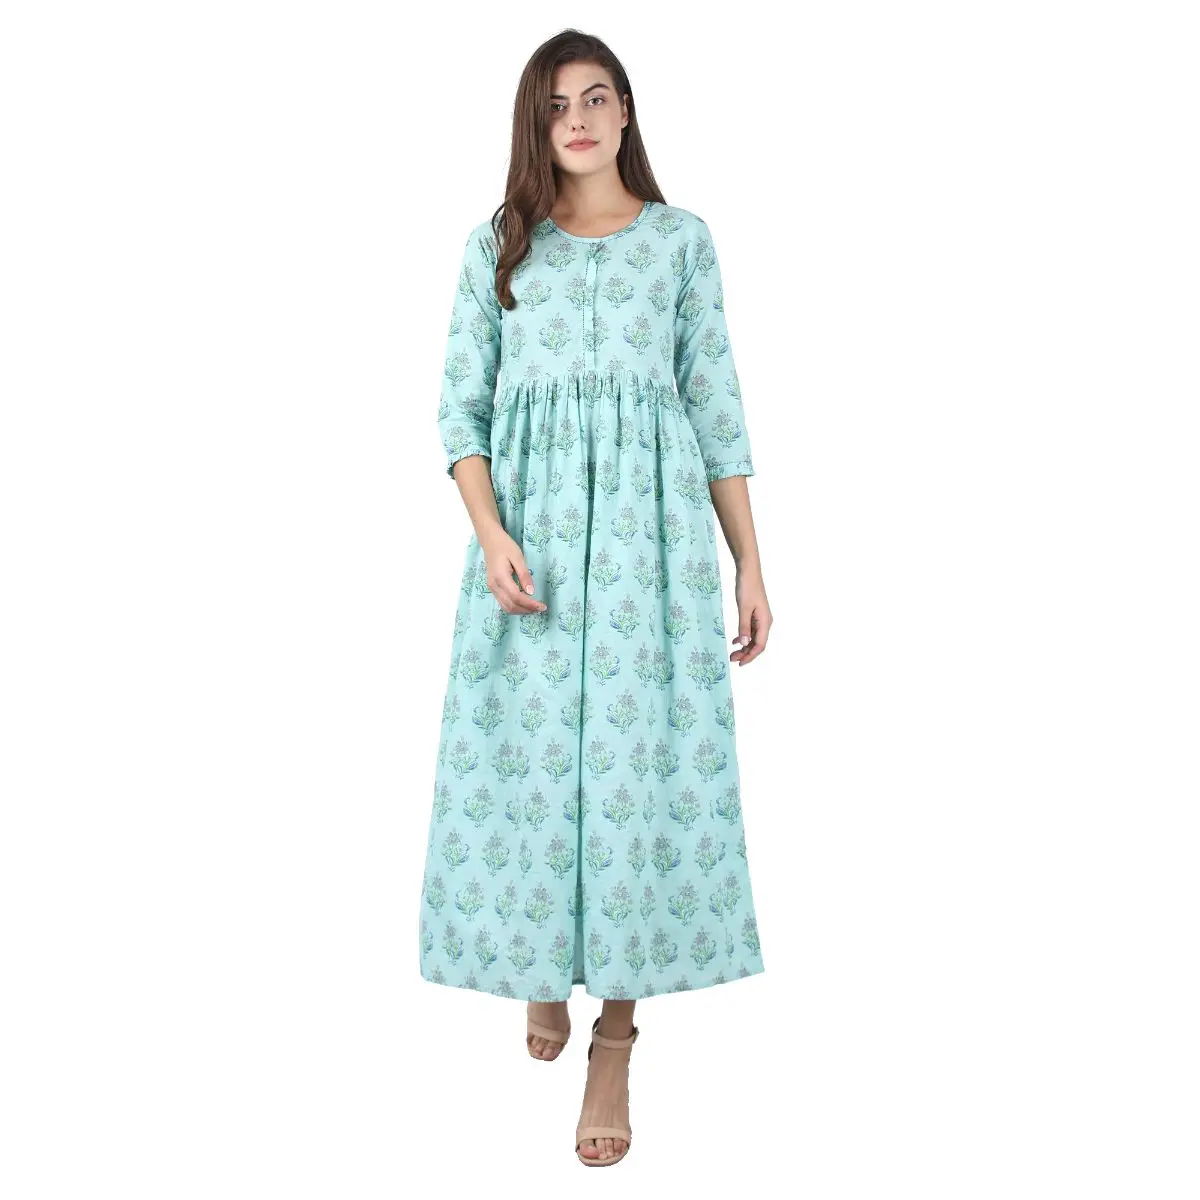 Sea Green Printed Ankle Long Ethnic Dress - Indian Designers Cotton Casual  Dresses Formal Evening Party Latest Dress Designs - Buy Simple Cotton  Kurtis,Ladies Smart Casual Dress,Casual Elegant Dress Code Product on